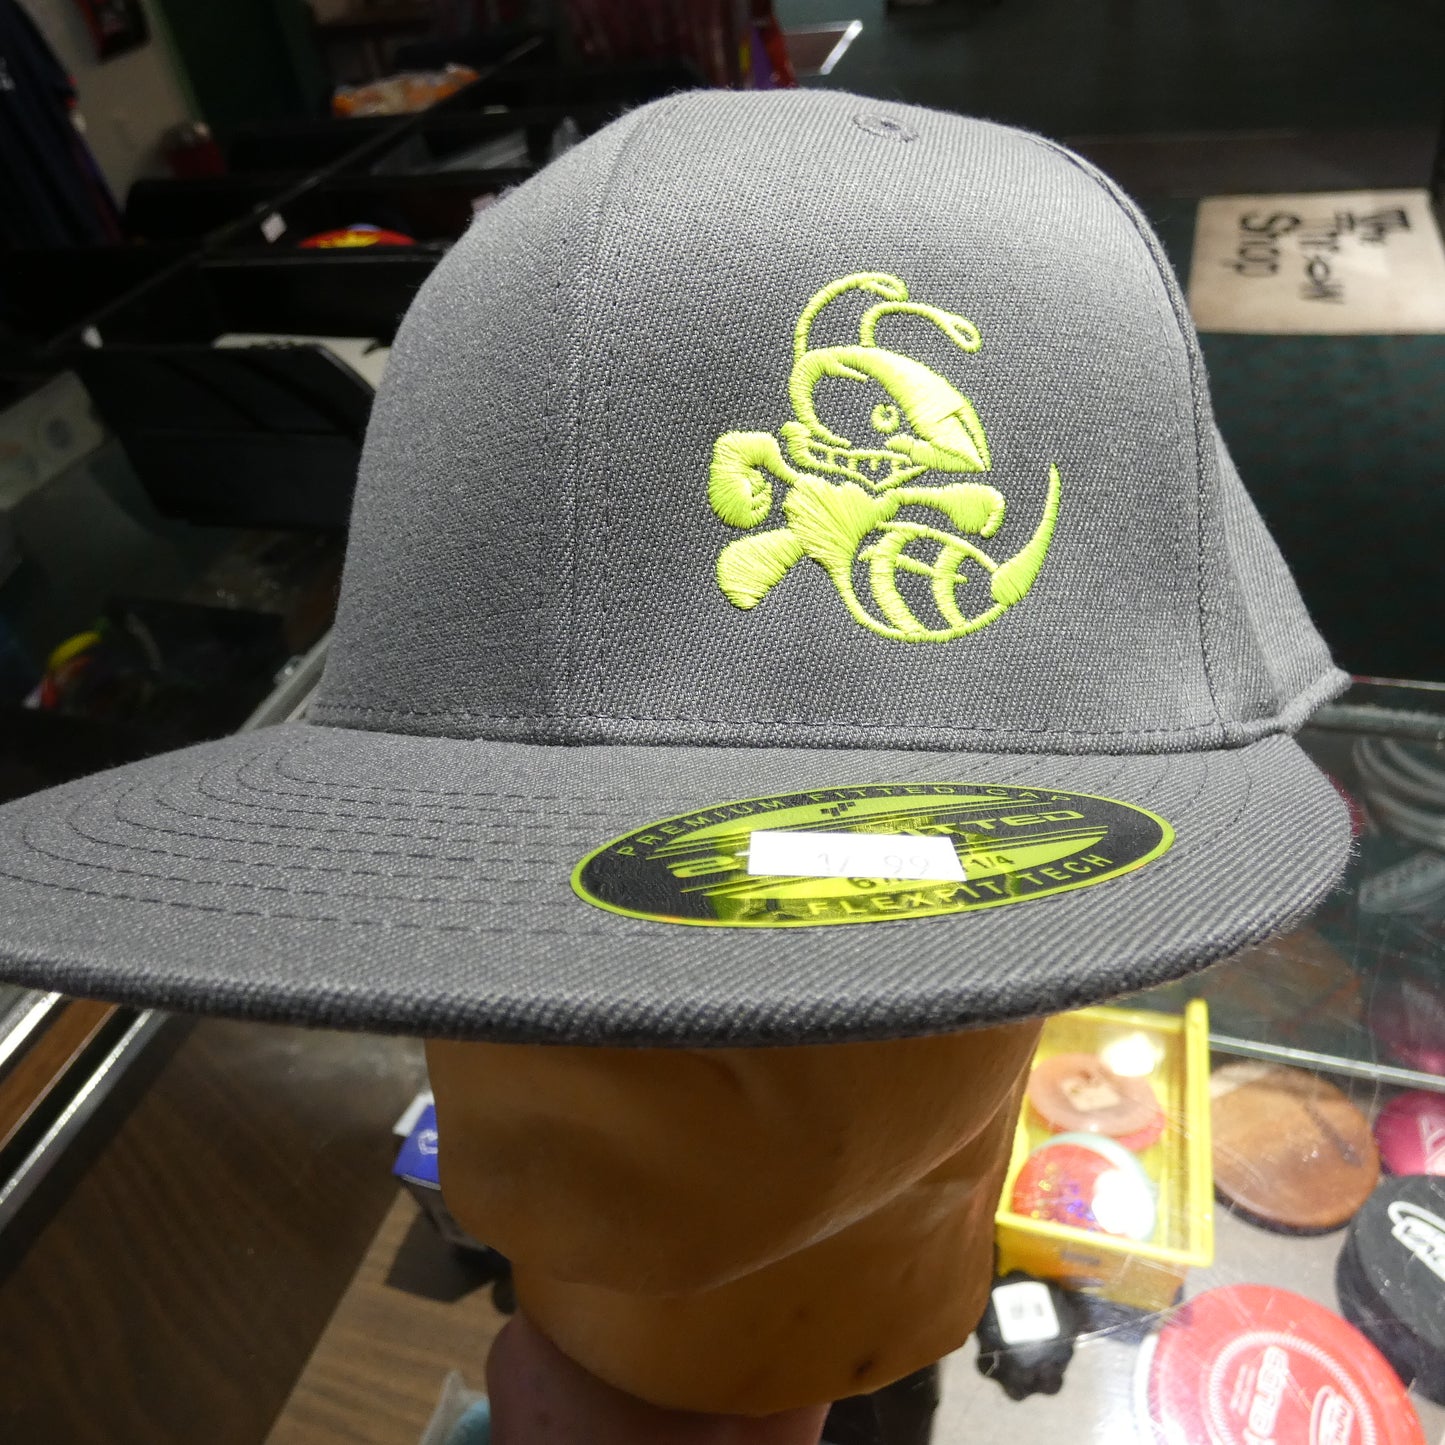 Buzzz 210 Premium Fitted Hat (Logo color may vary)